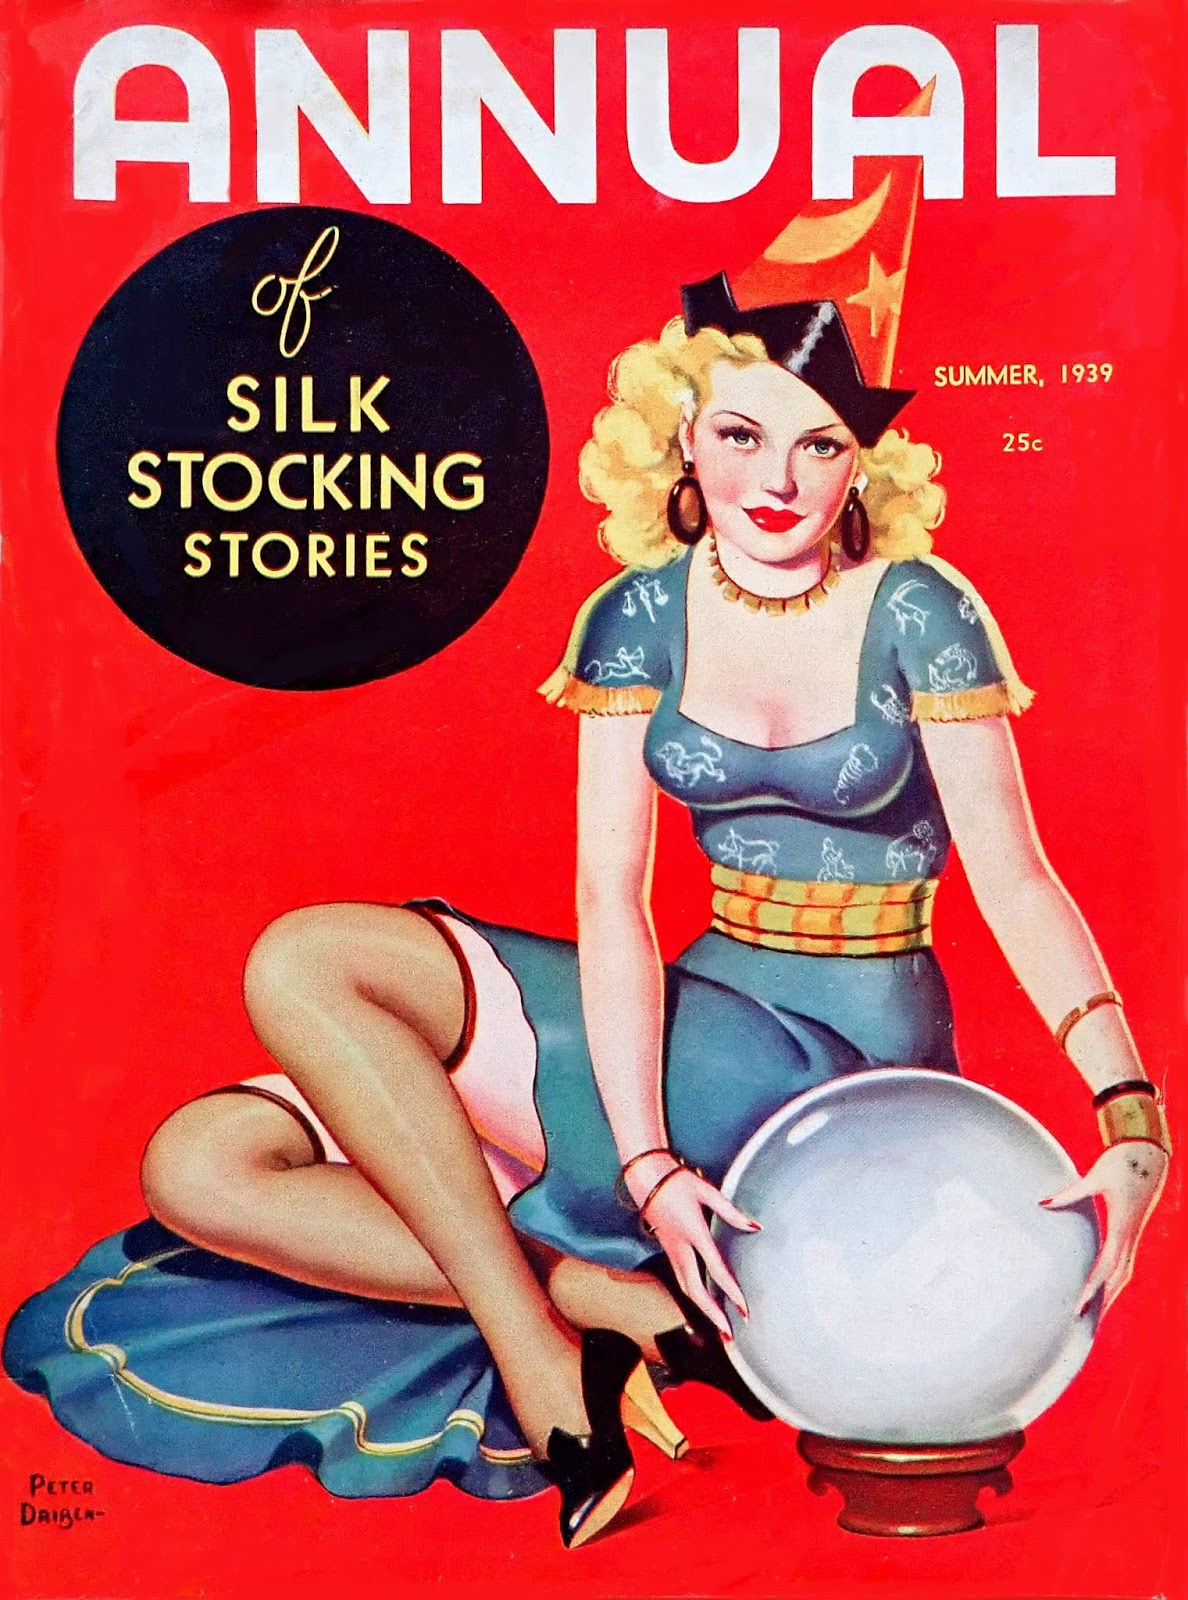 Vintage magazine cover Poster reproduction. Silk stocking annual